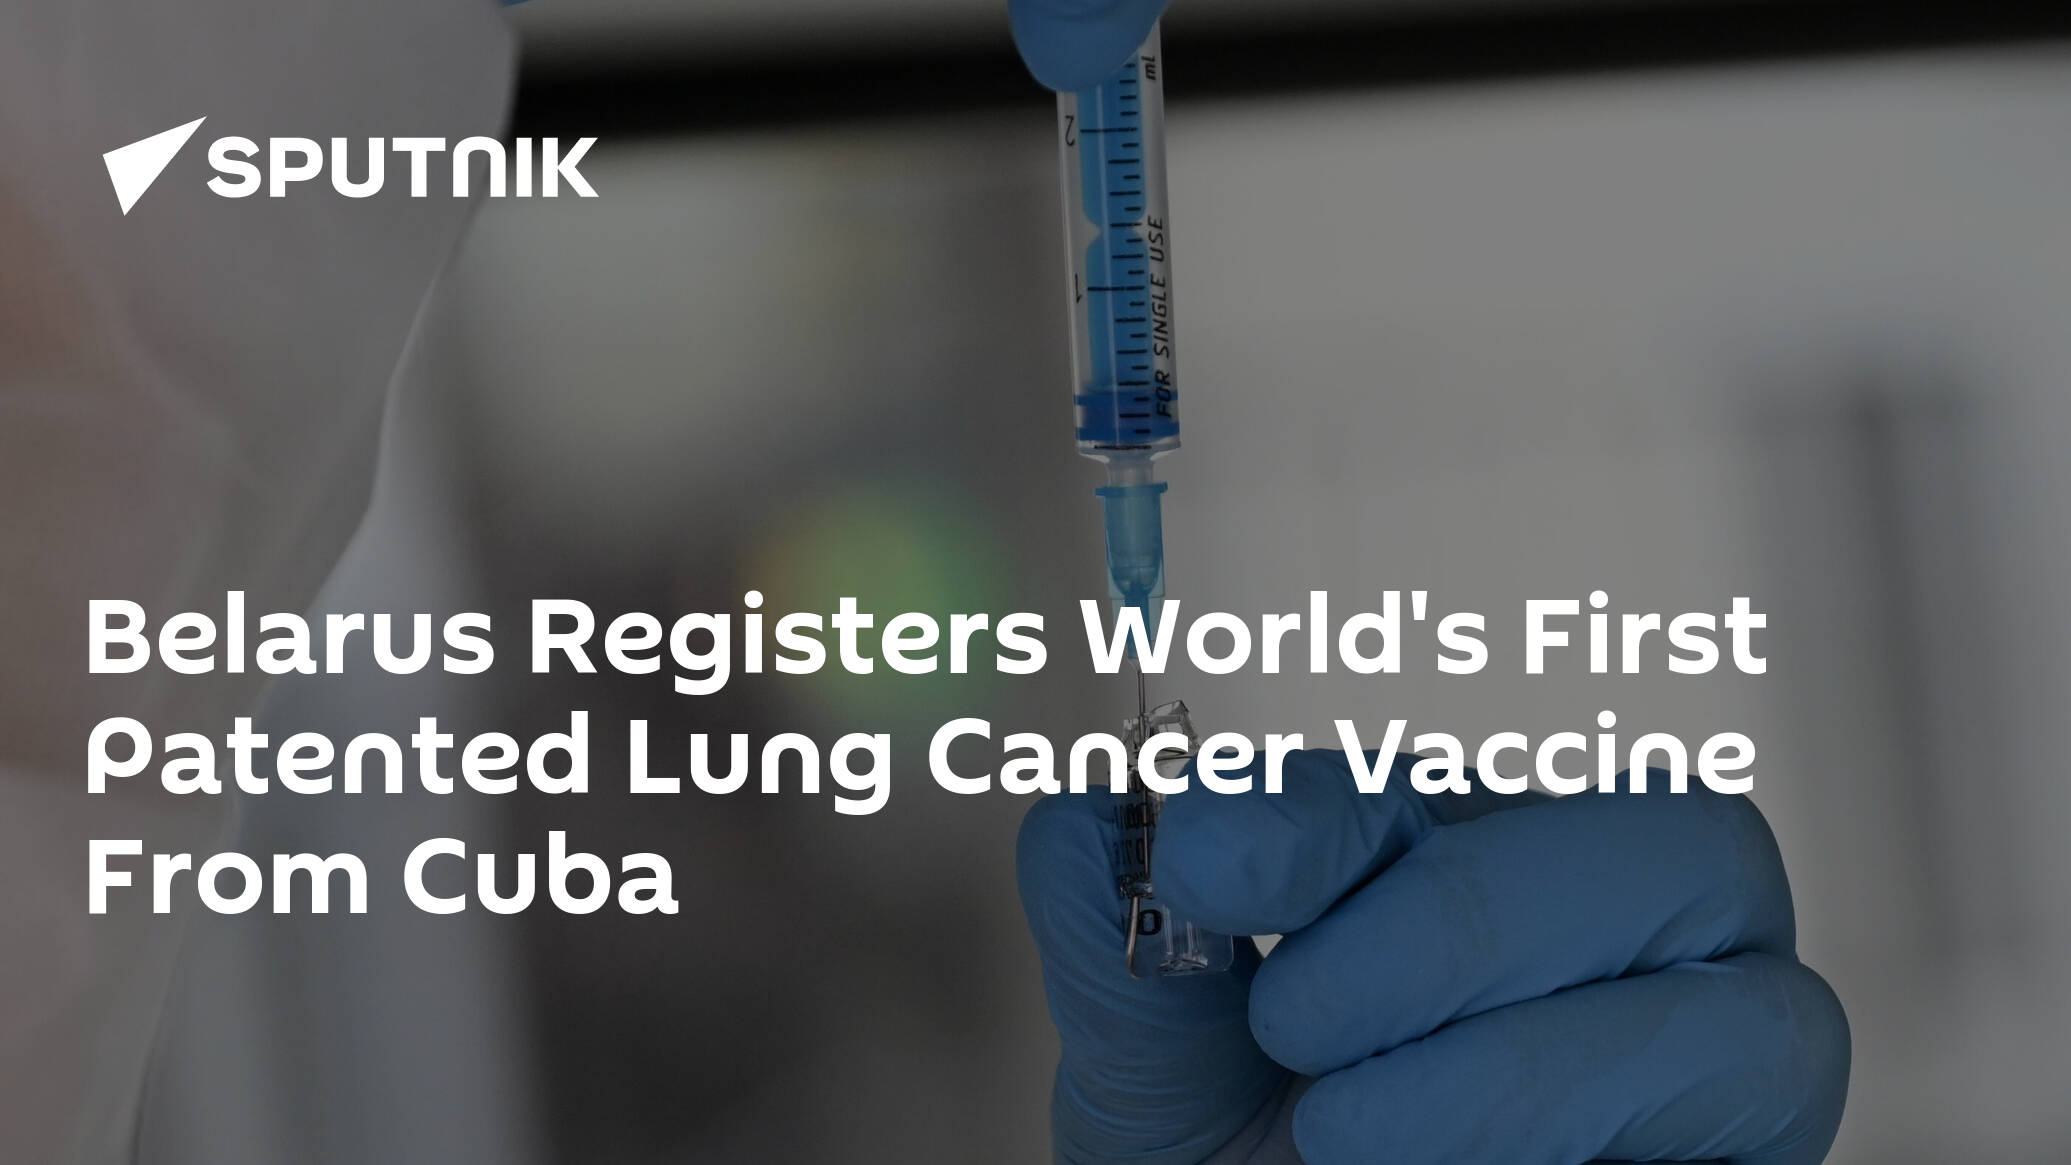 Belarus Registers World's First Patented Lung Cancer Vaccine From Cuba